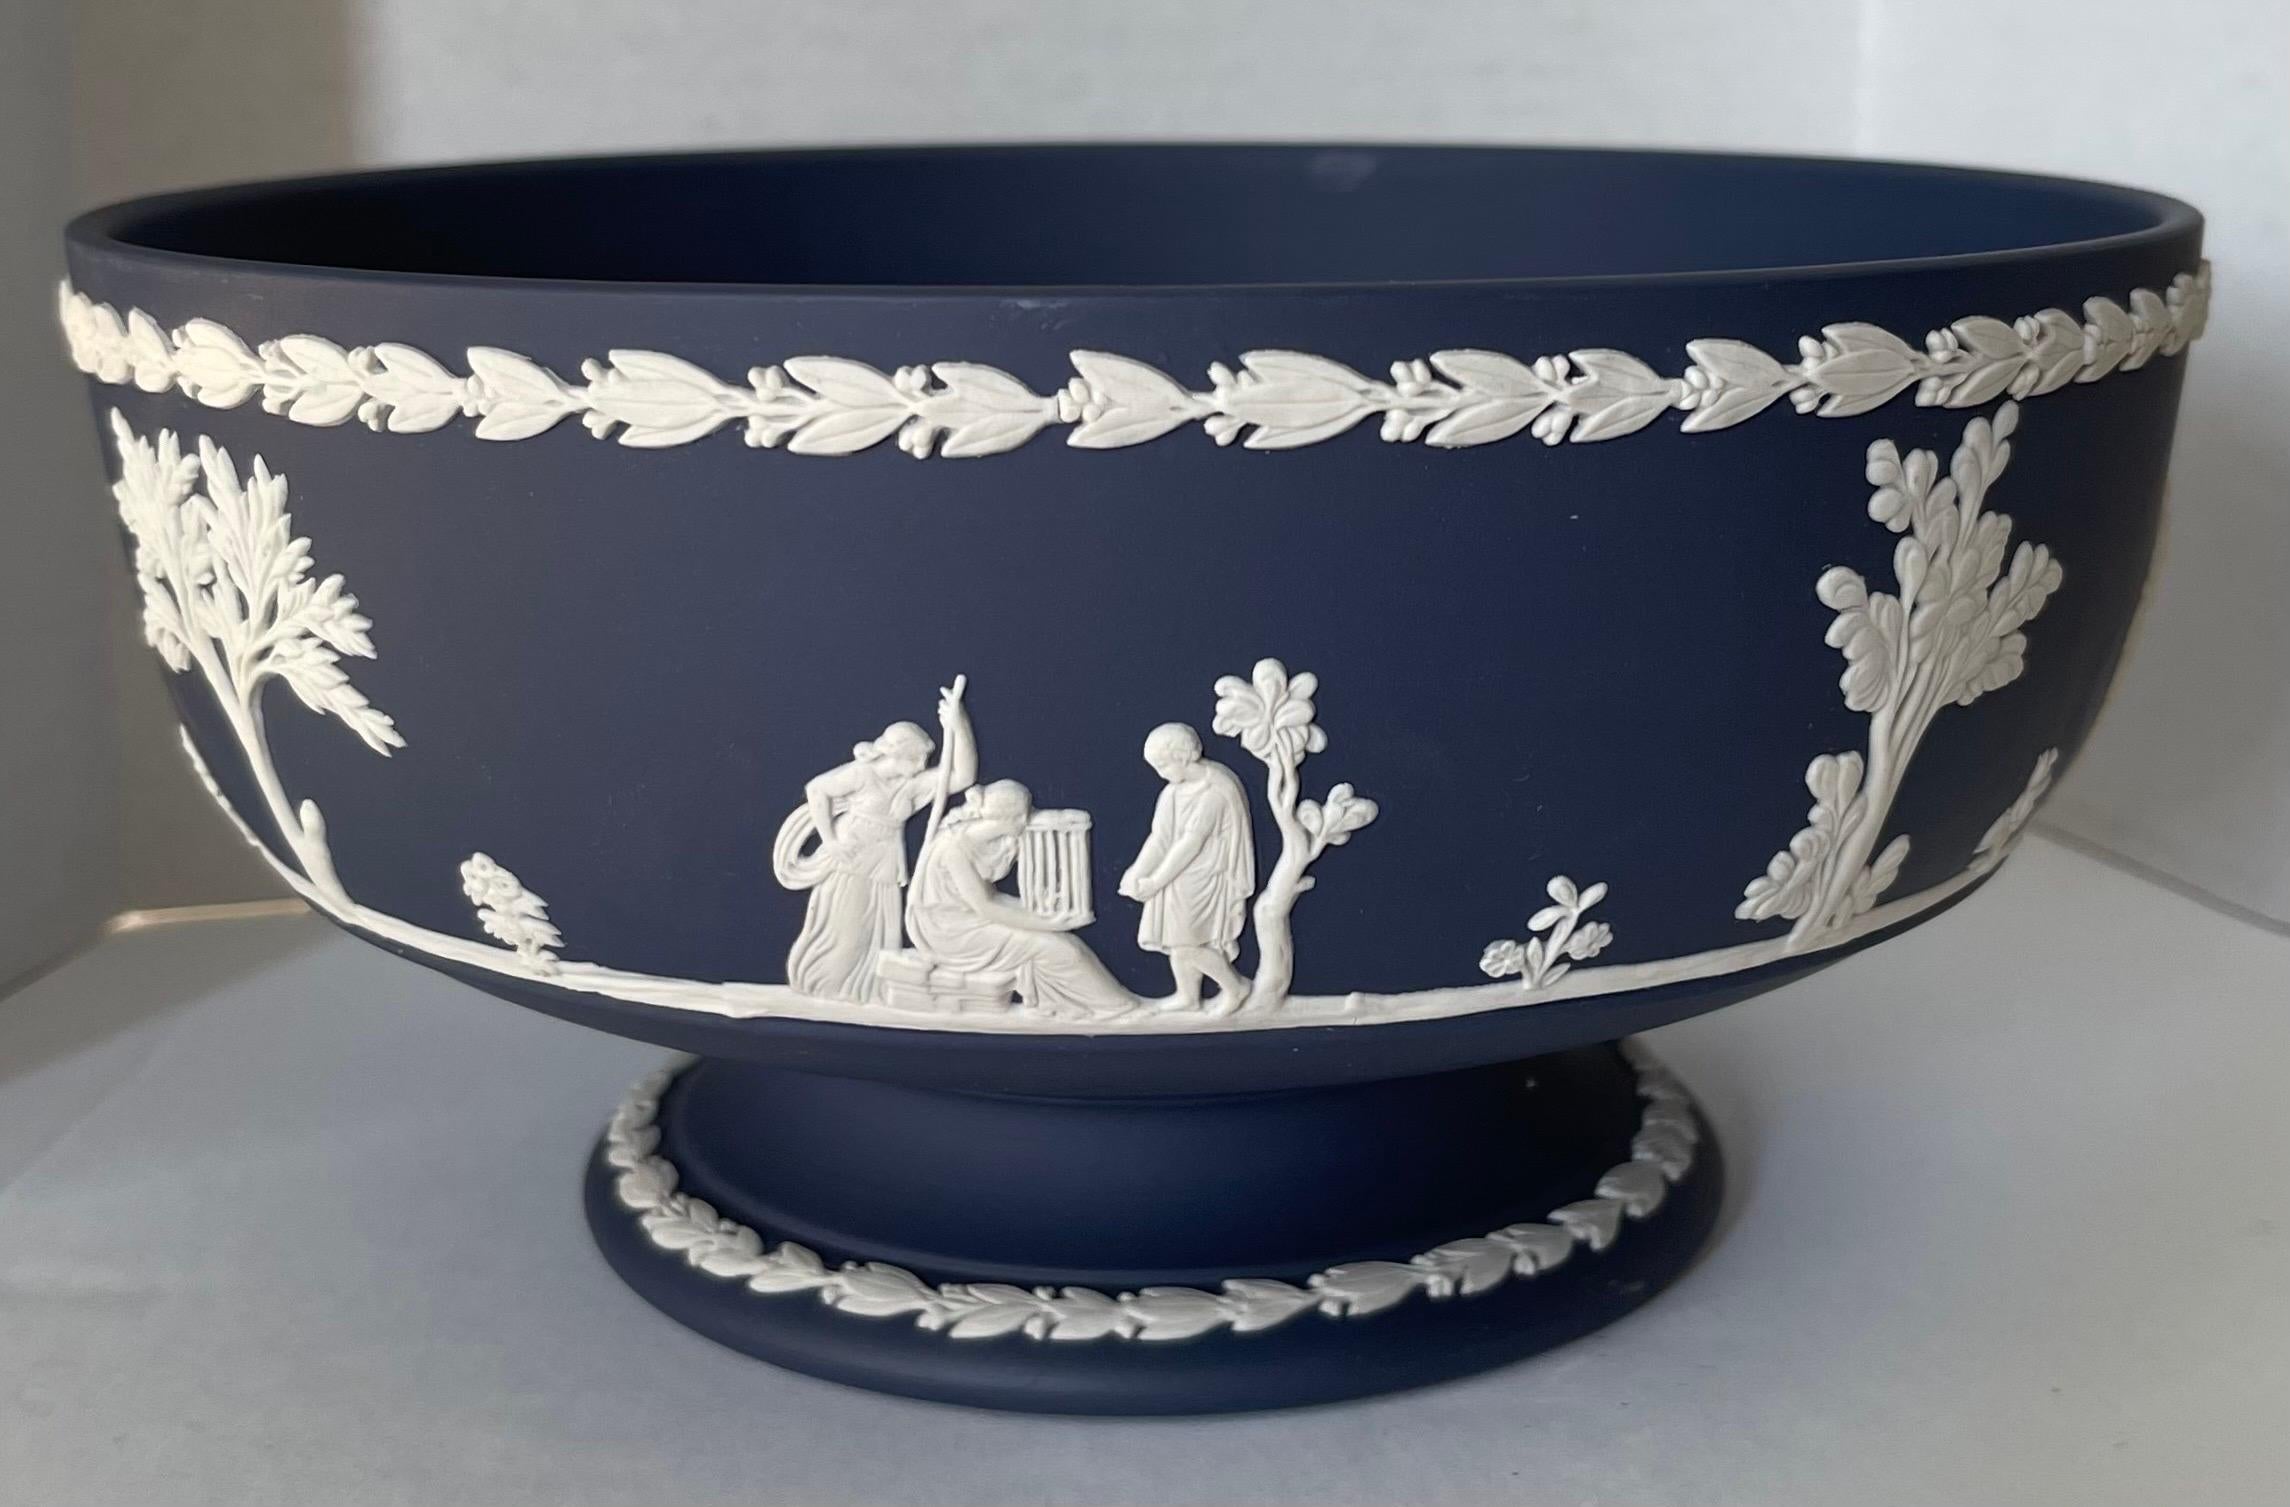 1970 Wedgwood jasperware footed bowl. Rare dark navy blue jasperware with all-over white neoclassical motif. Signed on the underside.